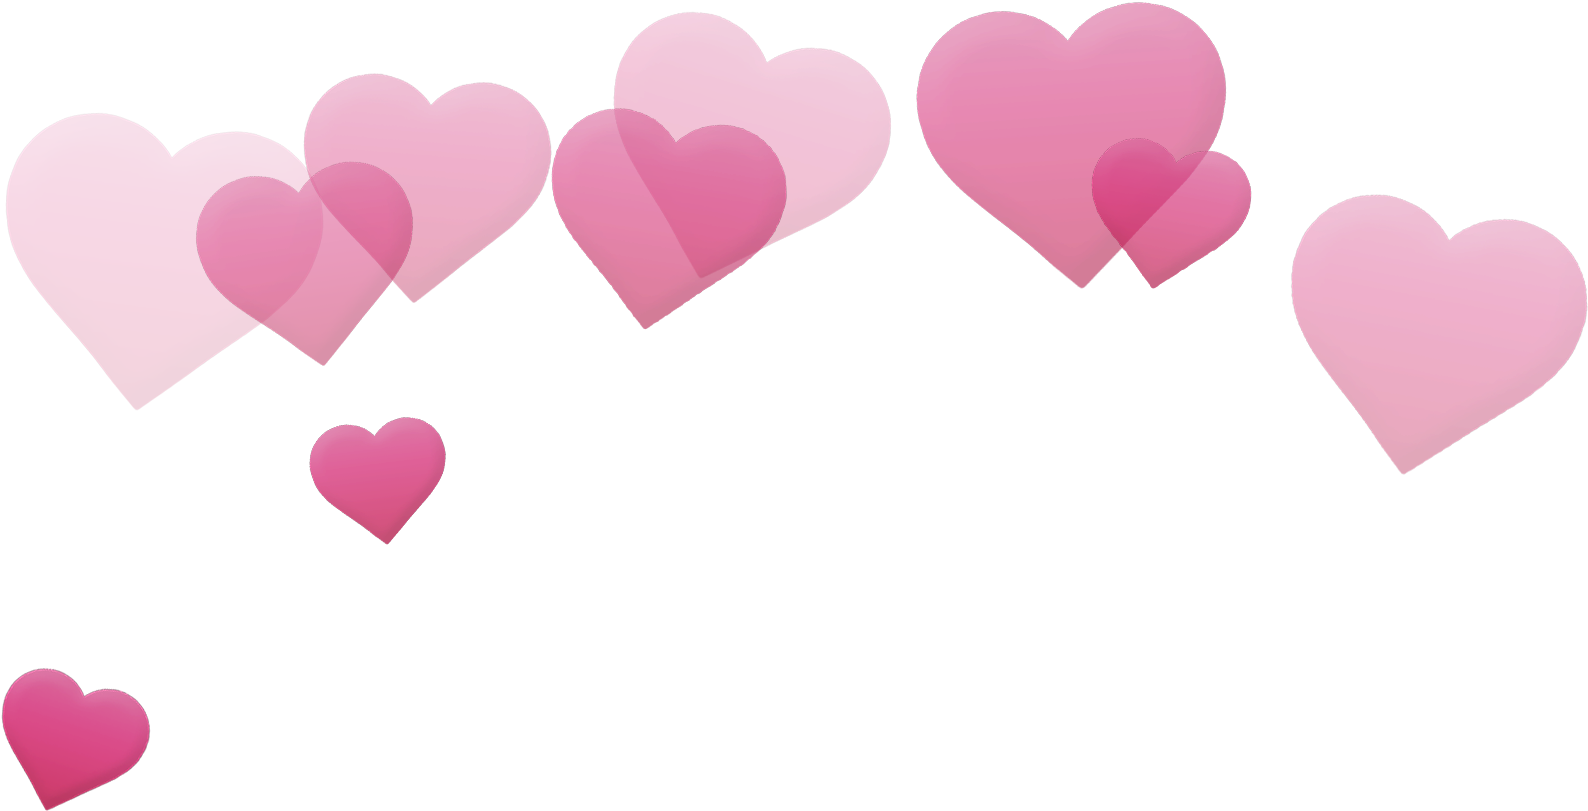 Floating Hearts Pattern PNG image